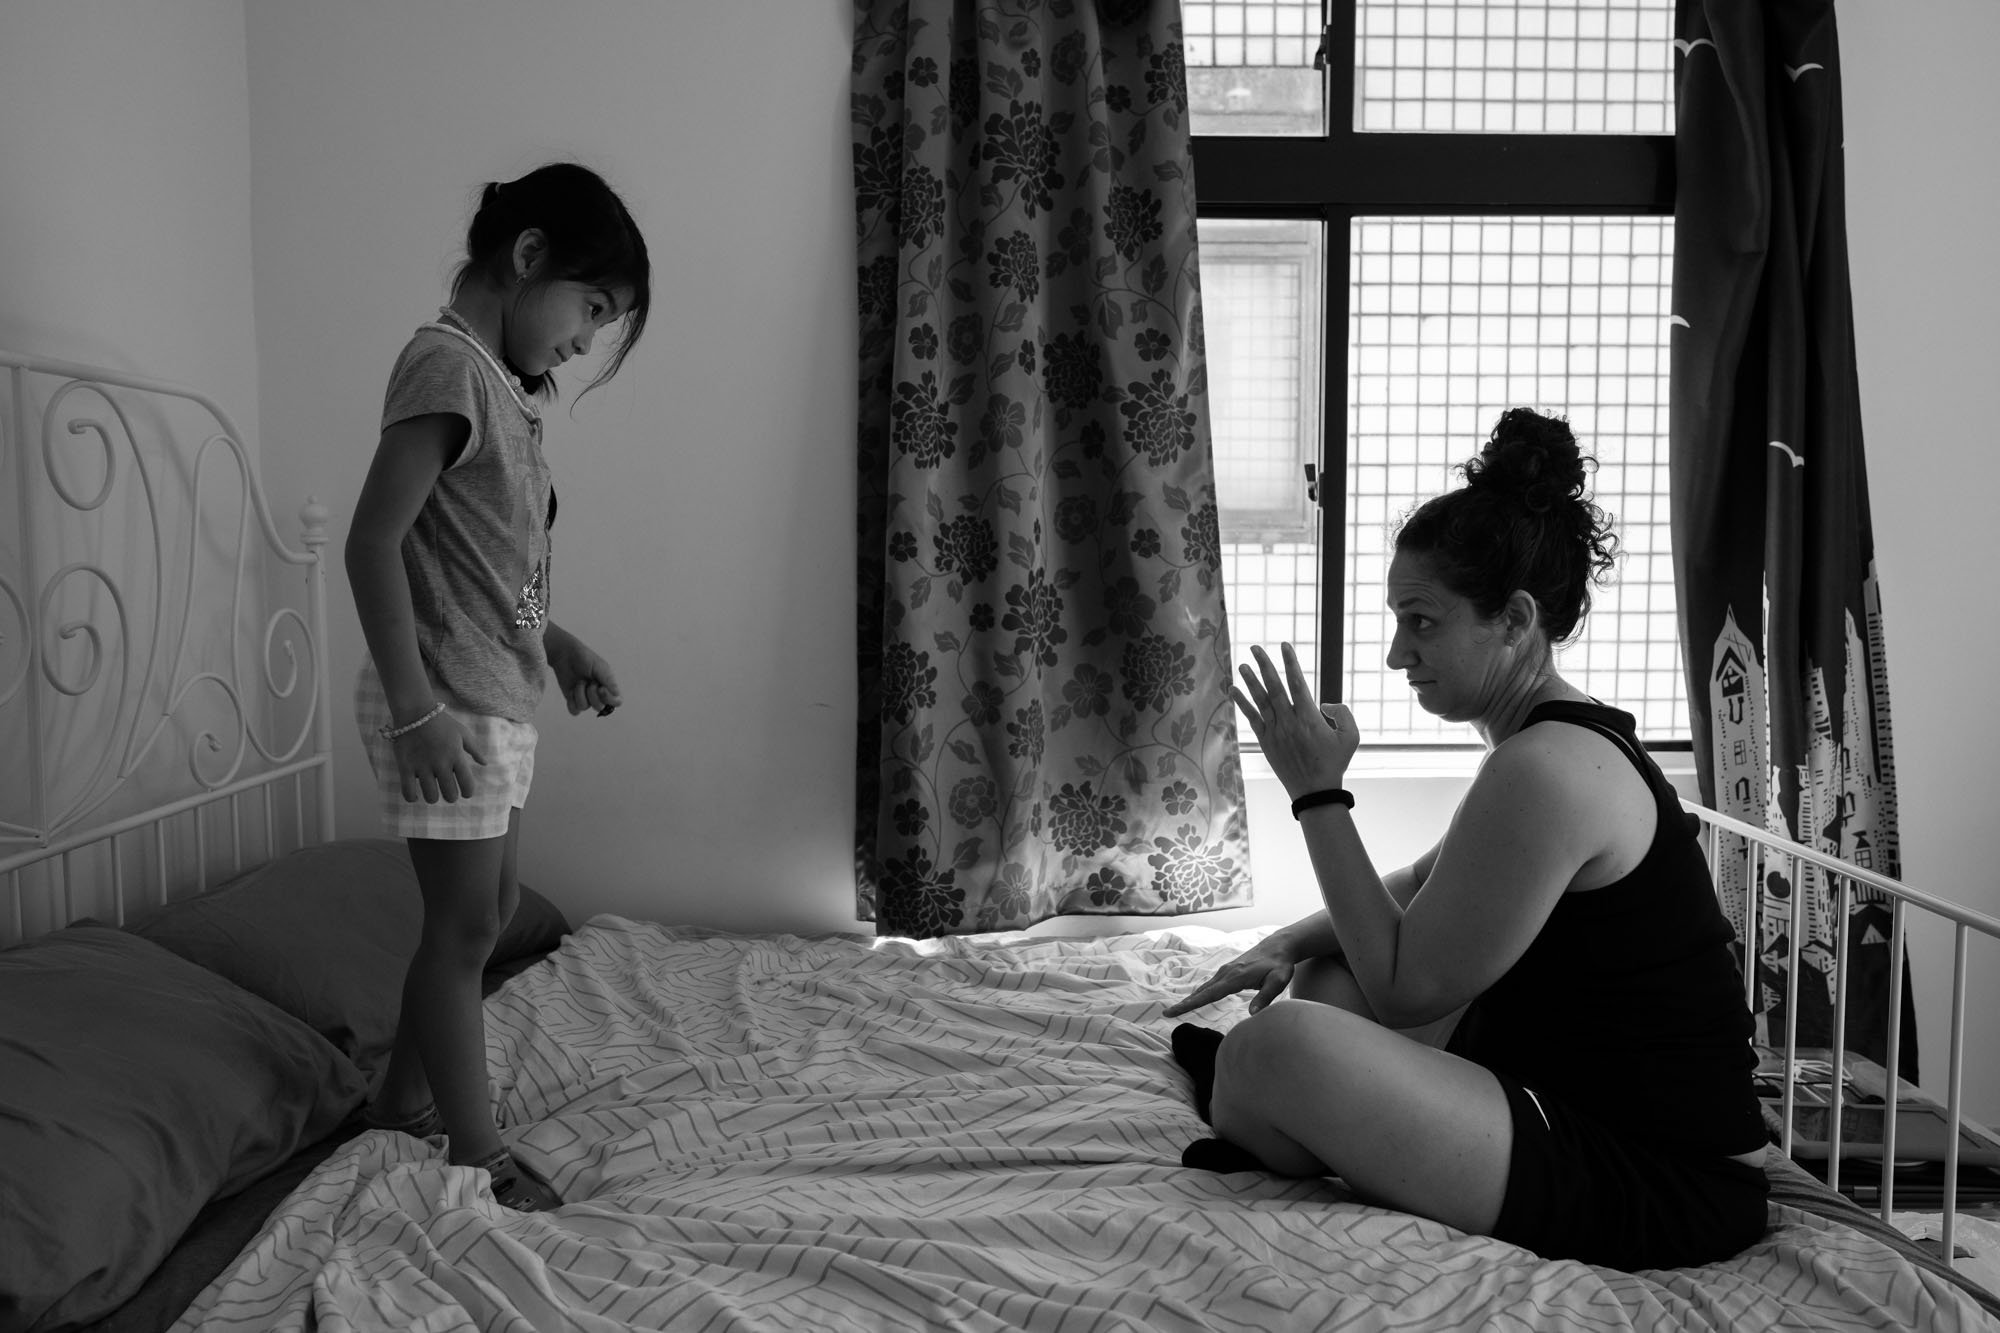 A mother and daughter bow to each other as they're about to start wrestling on their bed in their home in Taipei, Taiwan.